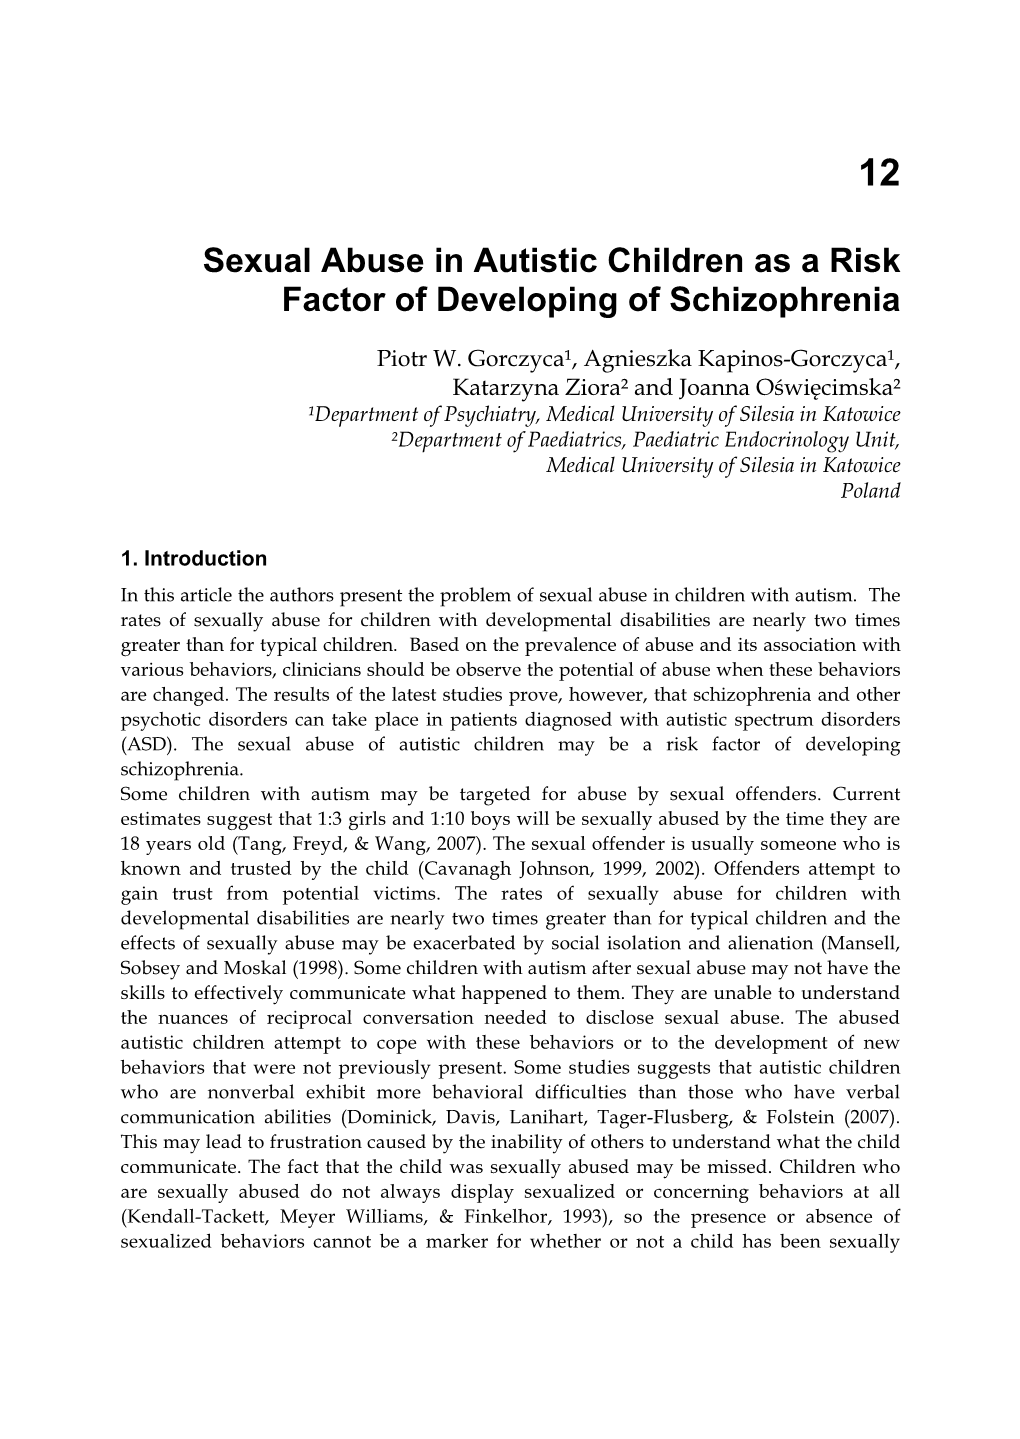 Sexual Abuse in Autistic Children As a Risk Factor of Developing of Schizophrenia